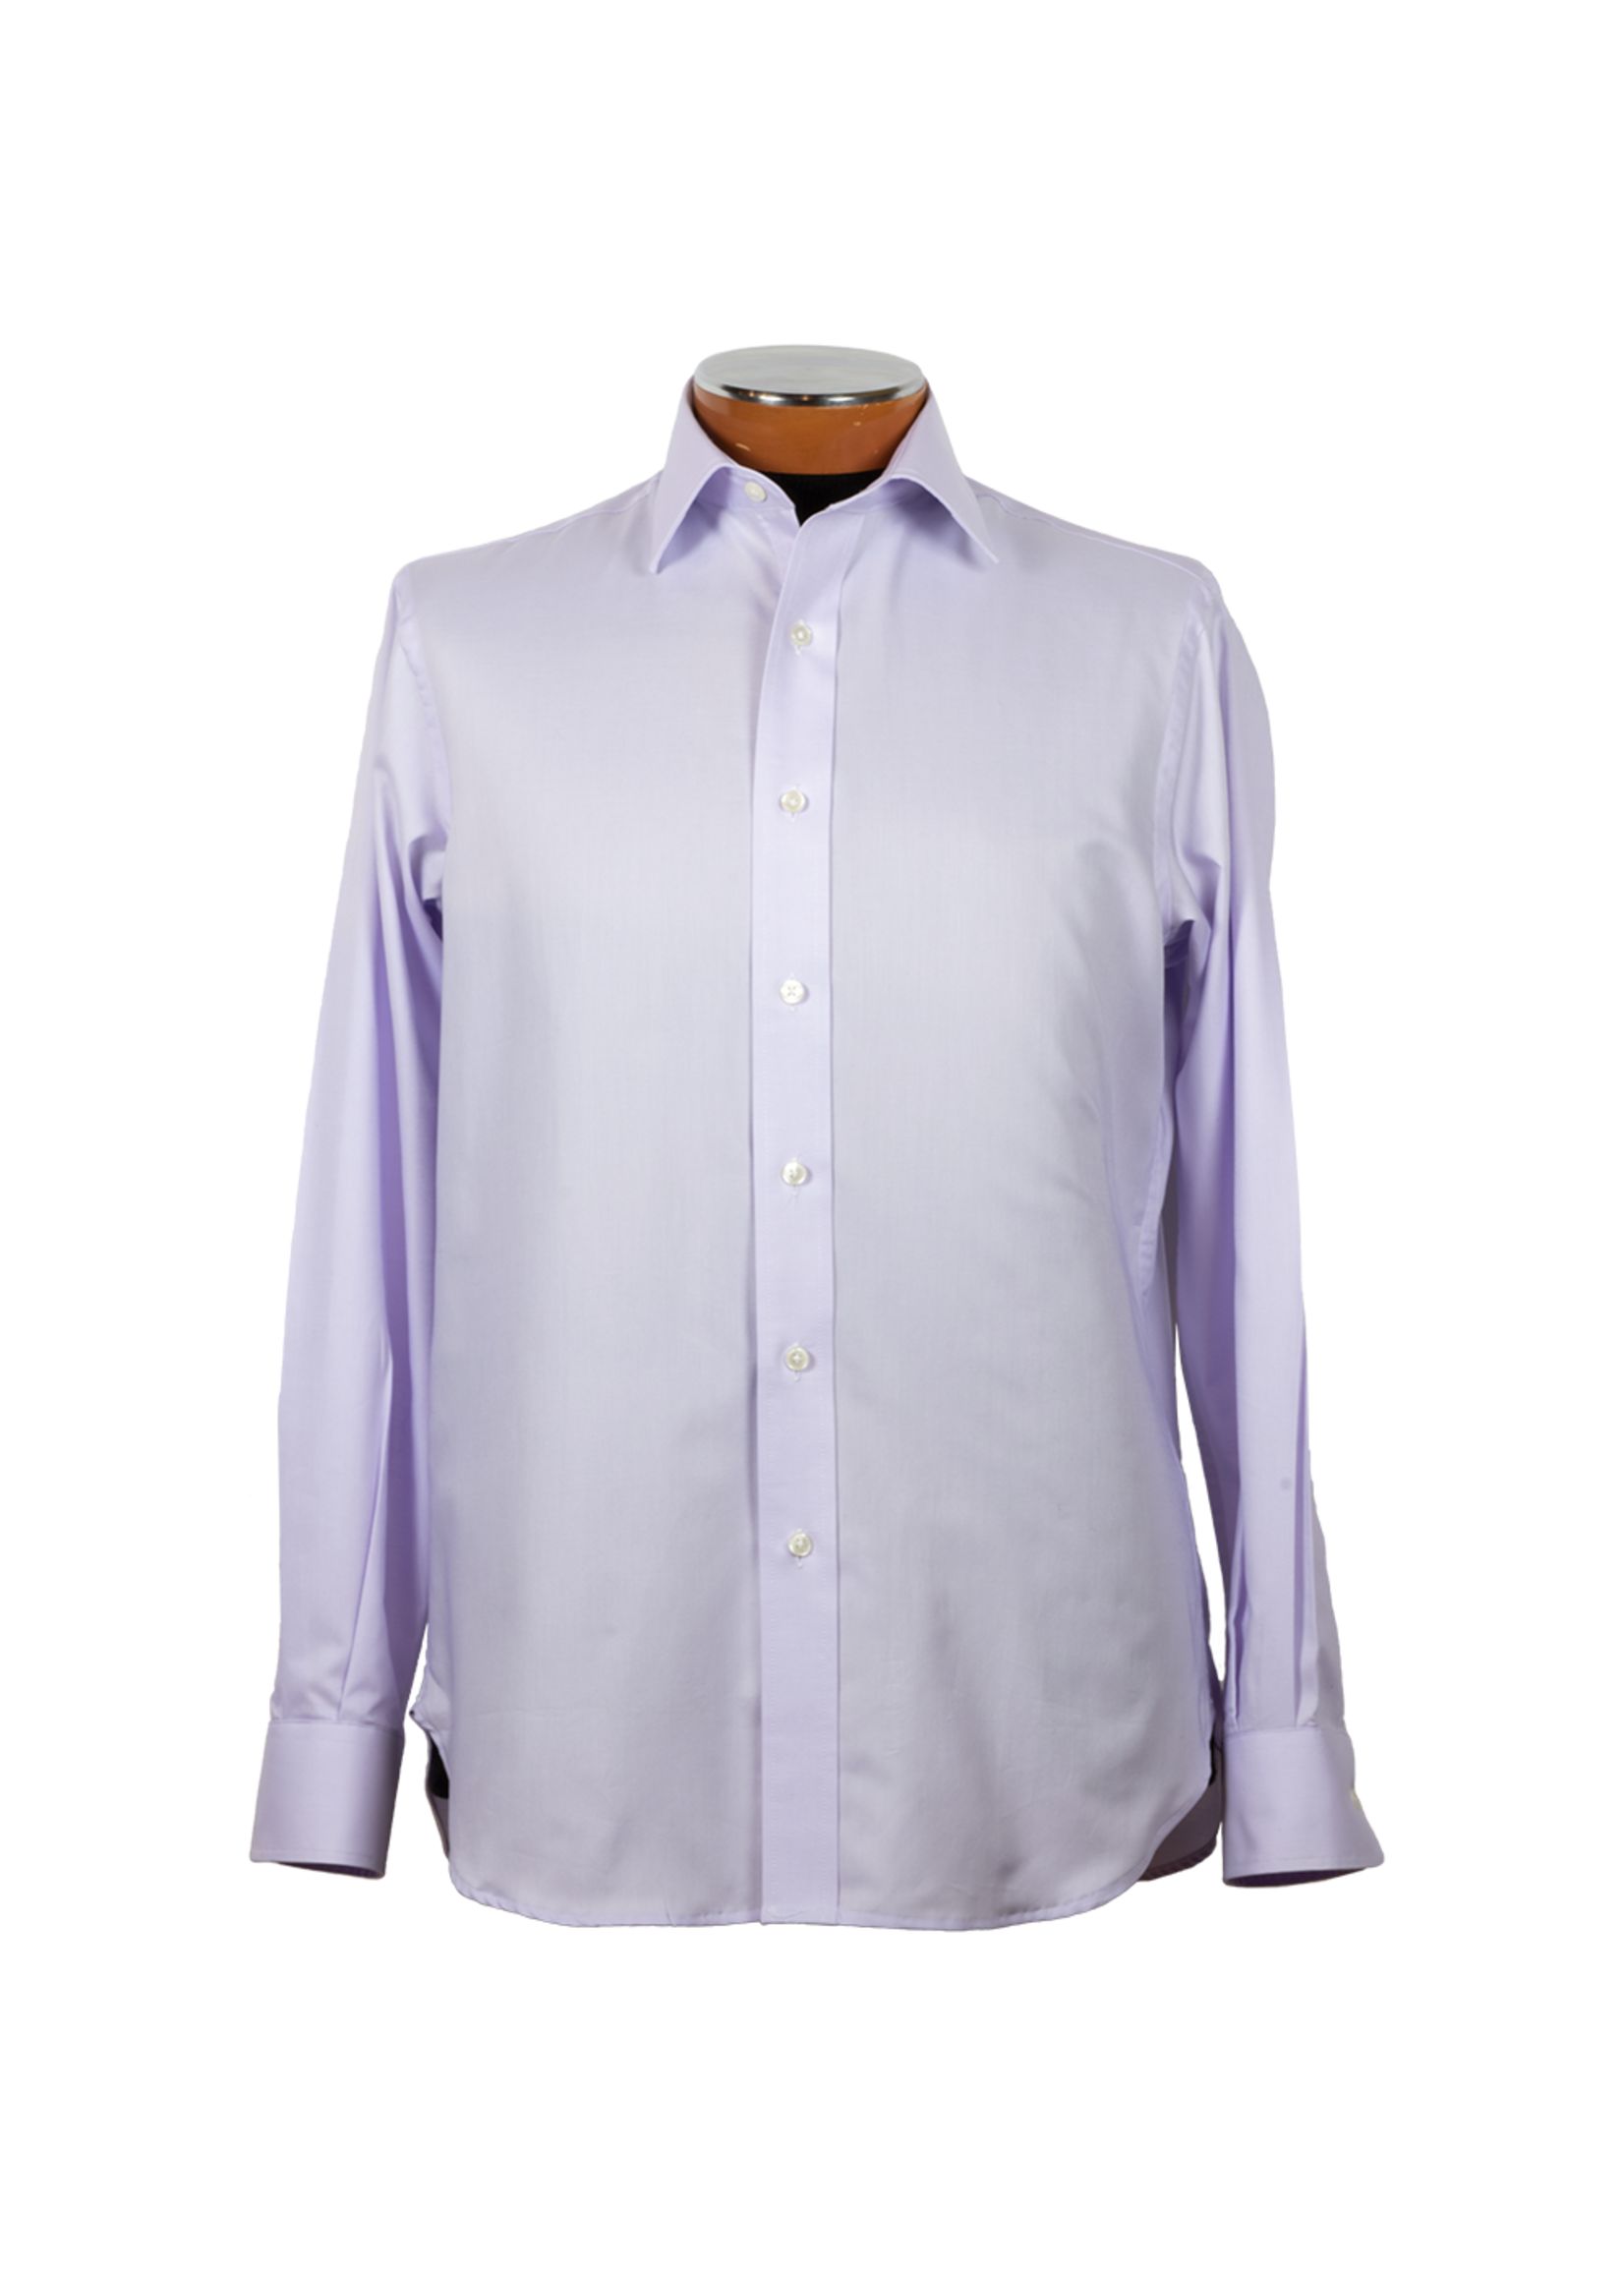 Drinkwater's Drinkwater's Lavender Queen's Oxford Dress Shirt